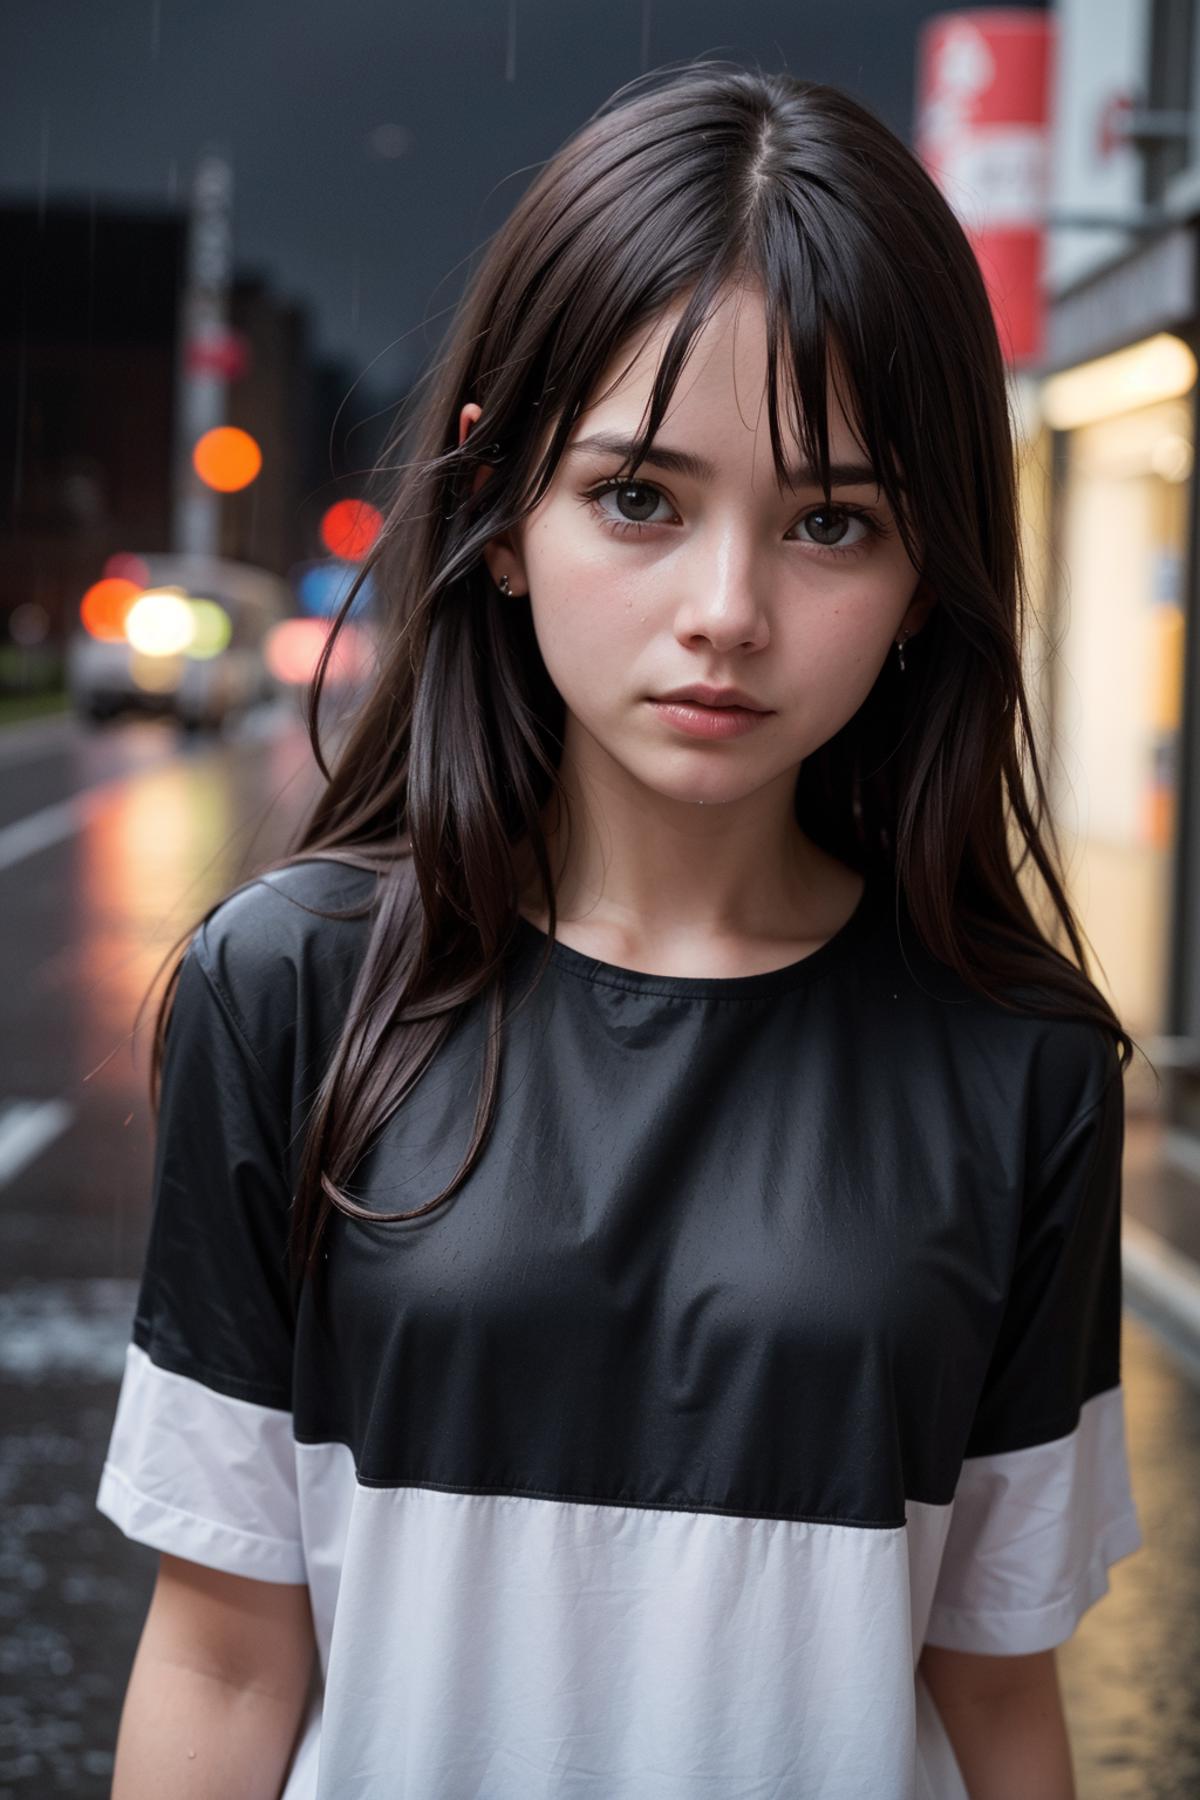 A Girl in a Black and White Shirt Staring at the Camera.